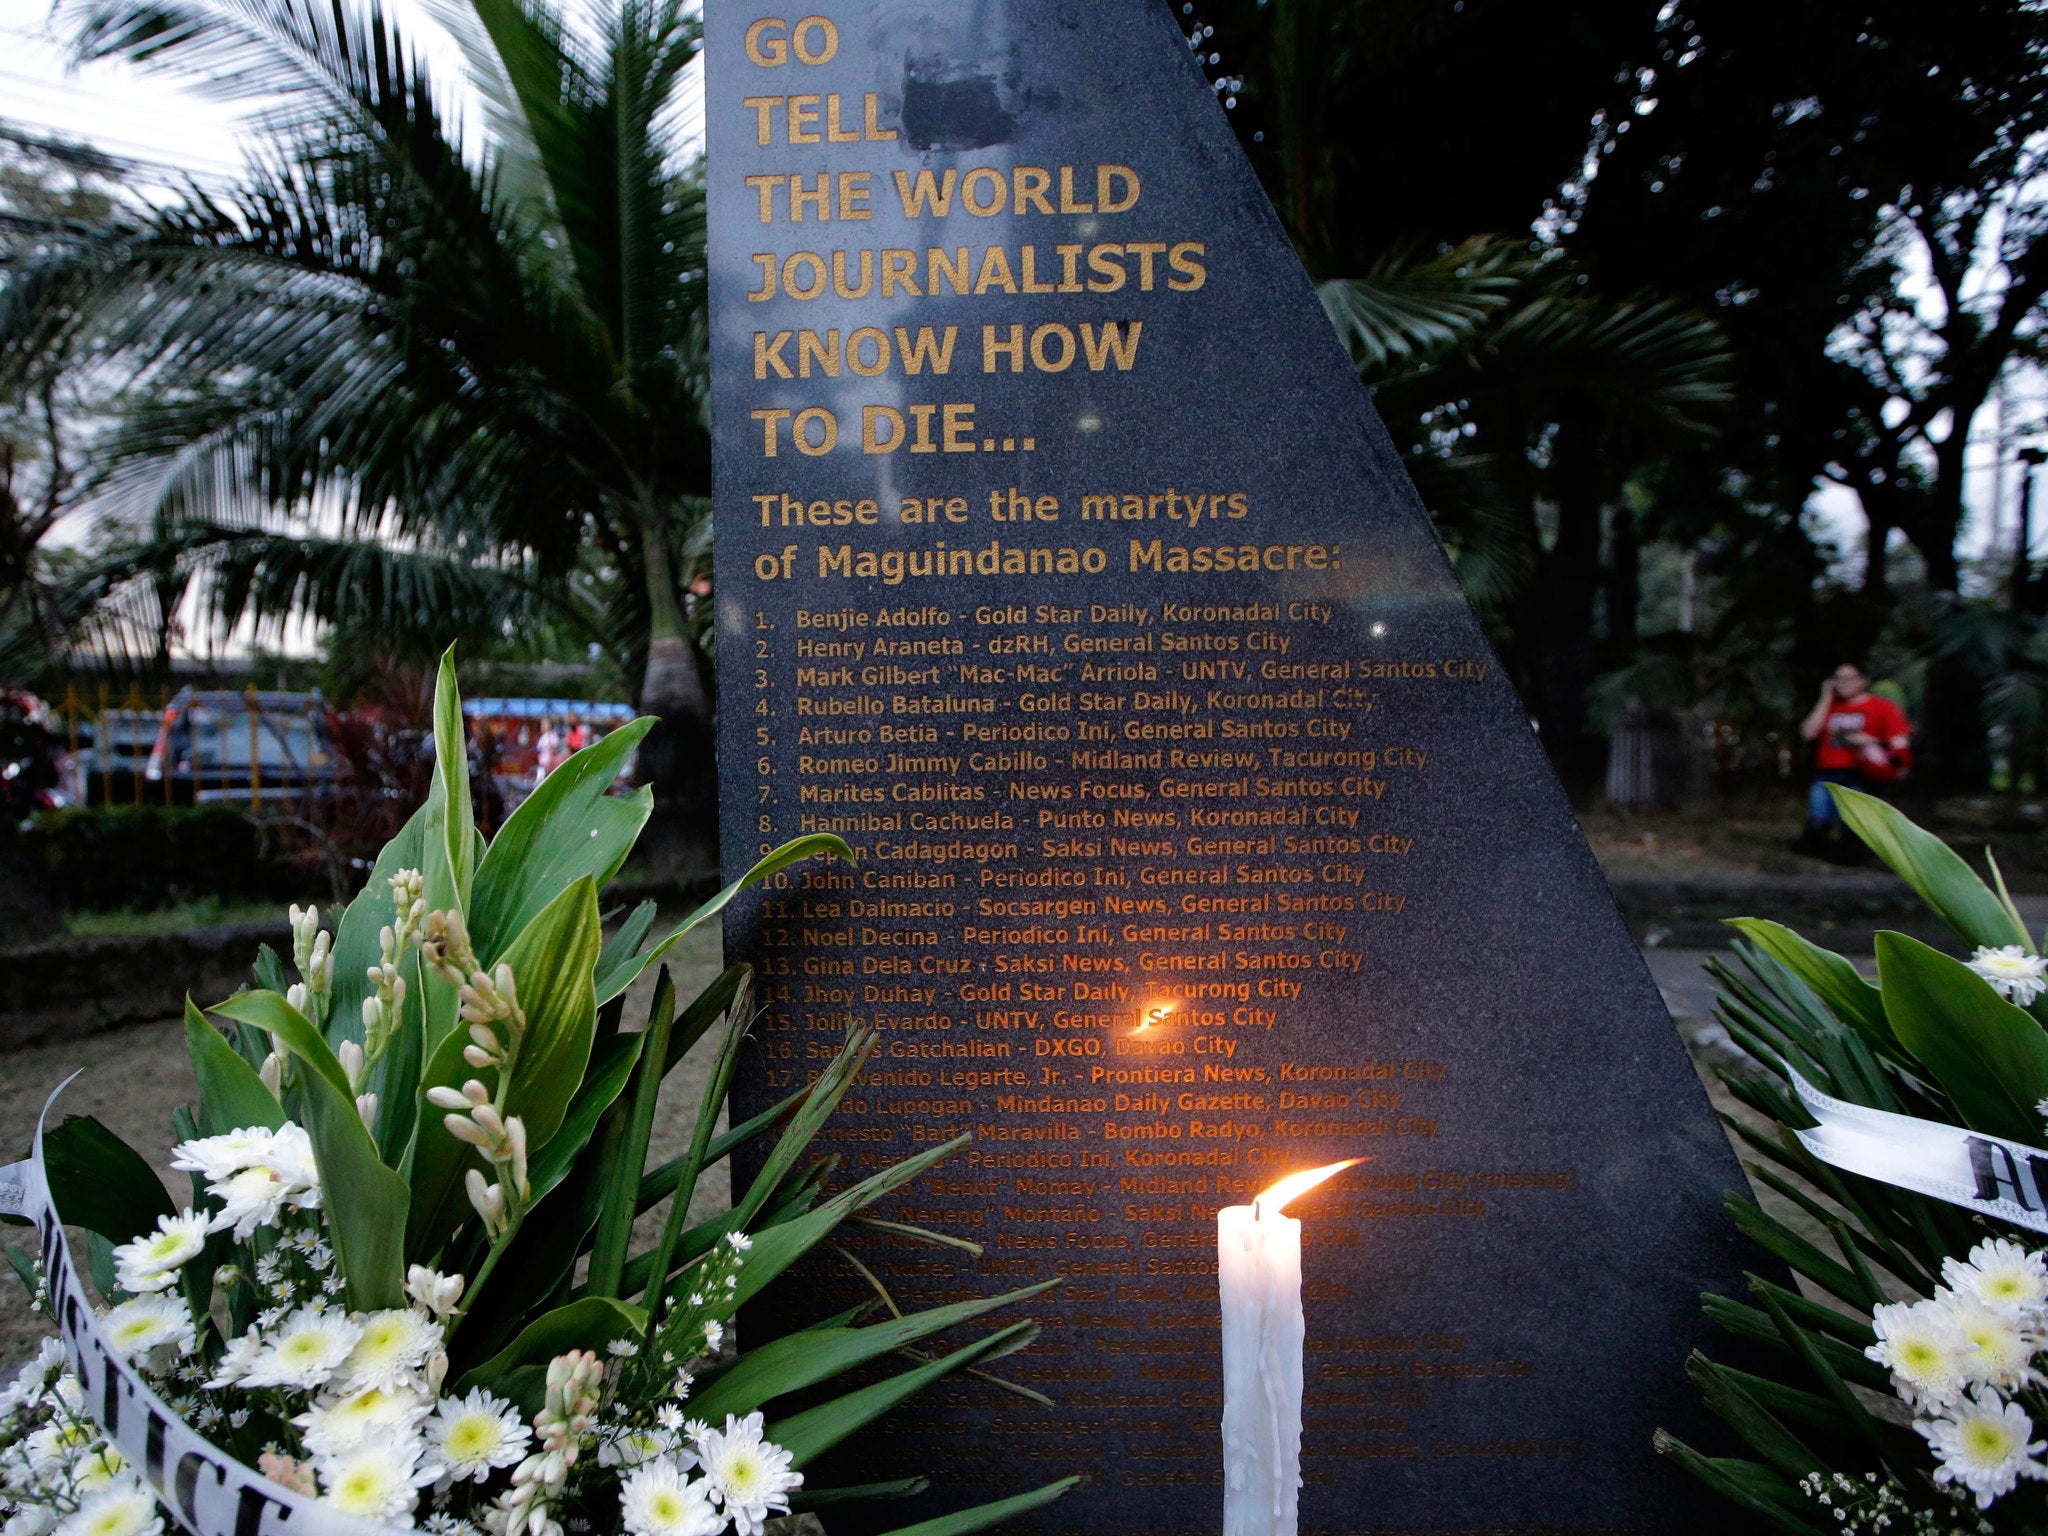 A lone candle lights up the granite marker engraved with the names of the 32 journalists, victims of a massacre in southern Philippines five years ago, outside the National Press Club in Manila, Philippines